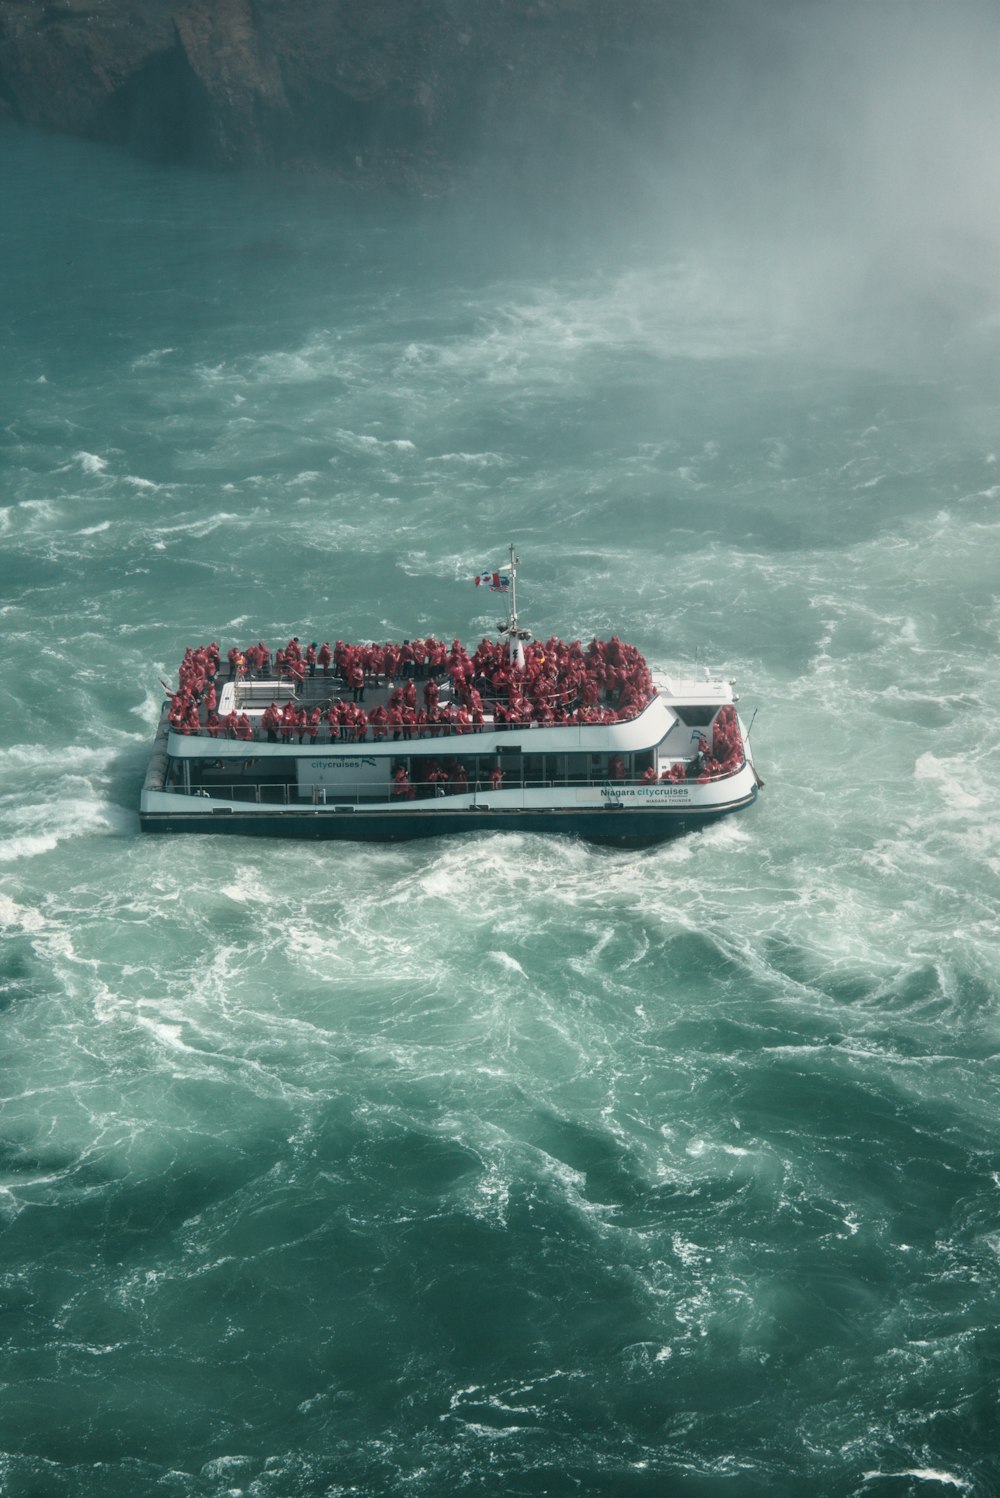 a large boat full of people in the water